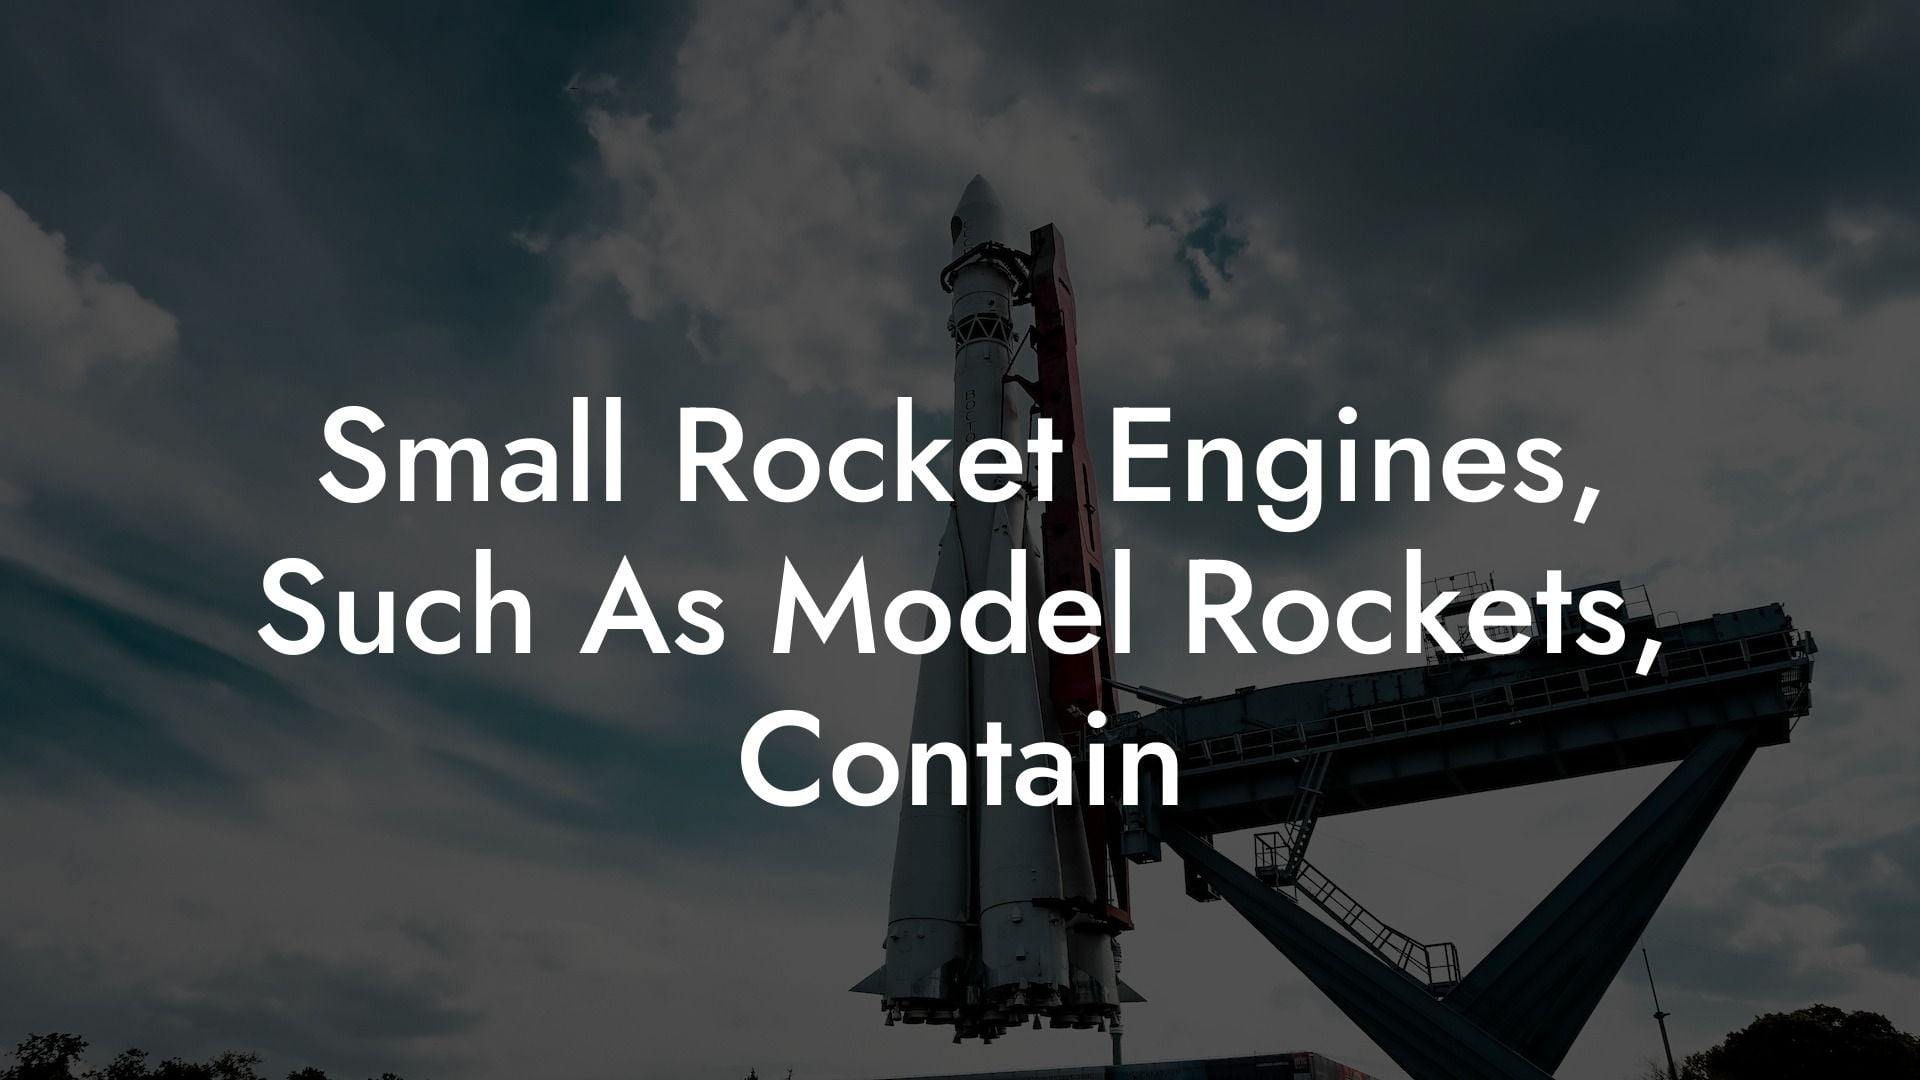 Small Rocket Engines, Such As Model Rockets, Contain